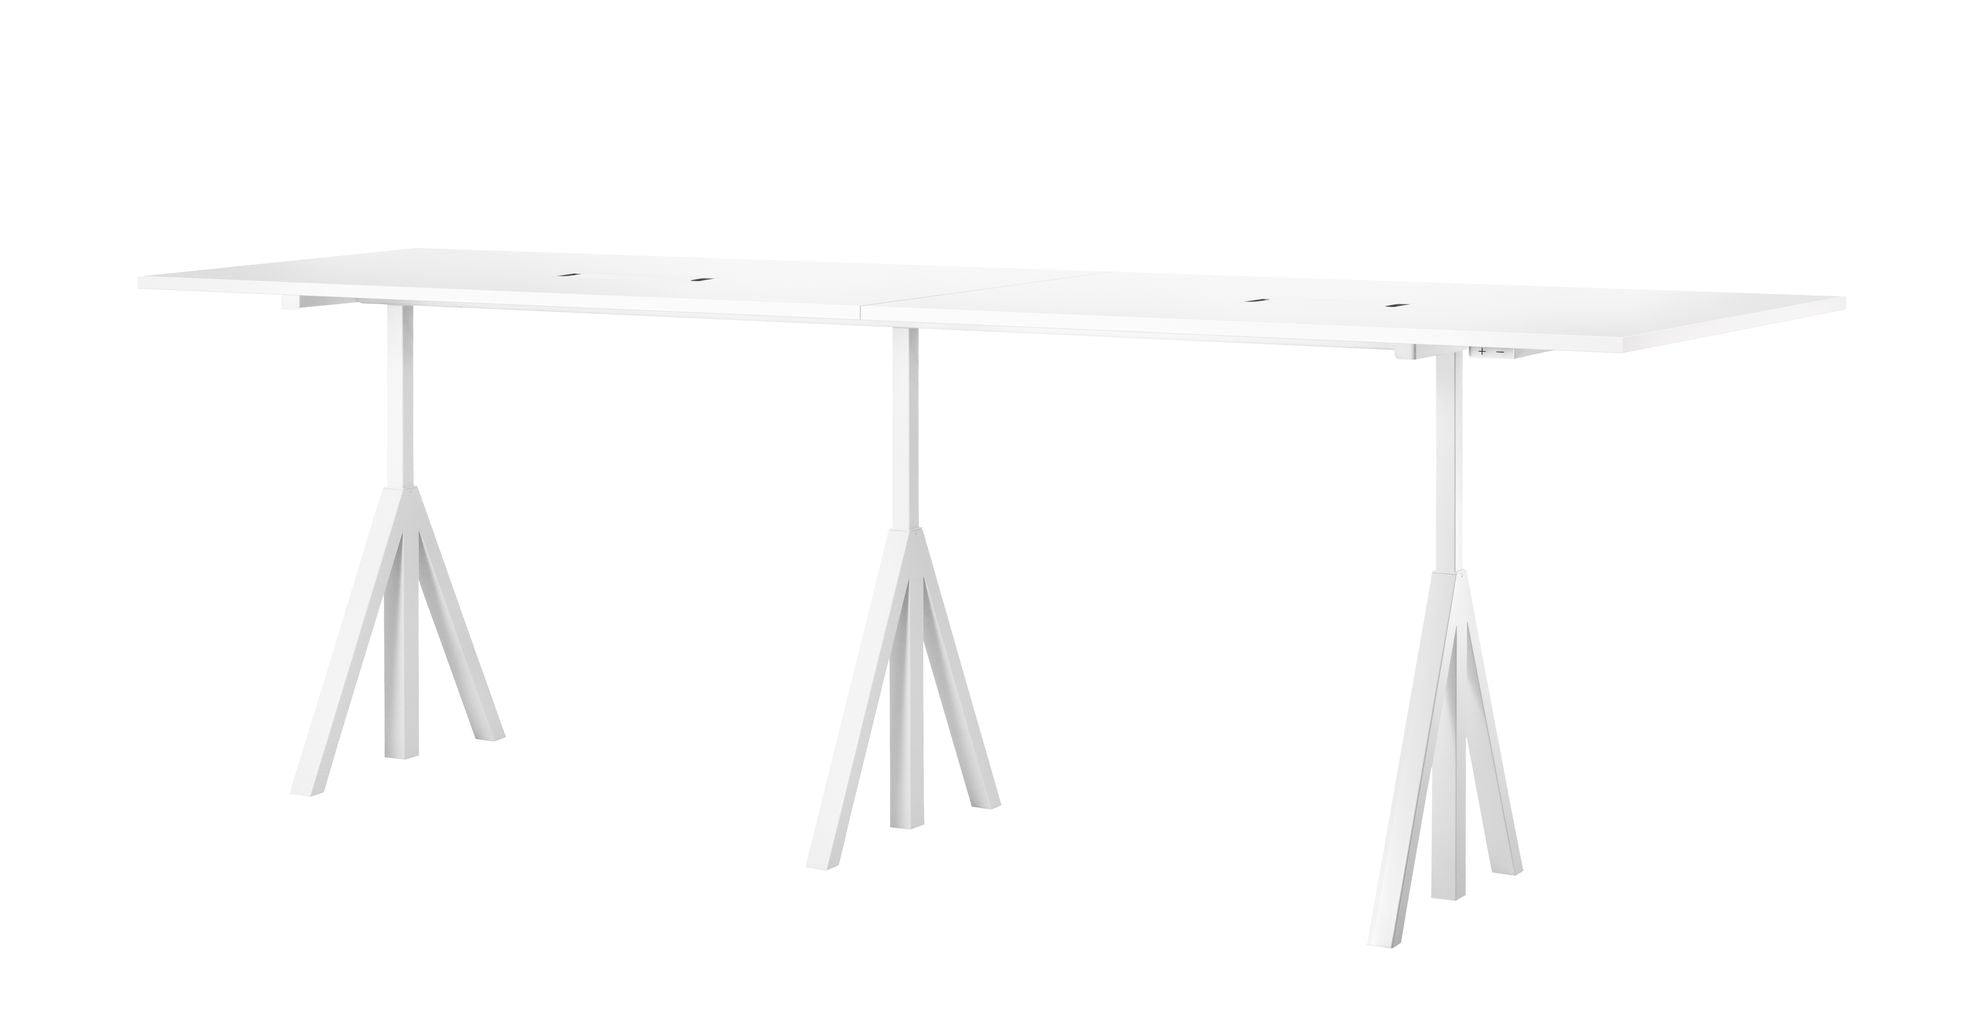 String Furniture Height Adjustable Conference Table 90x180 Cm, White Laminate